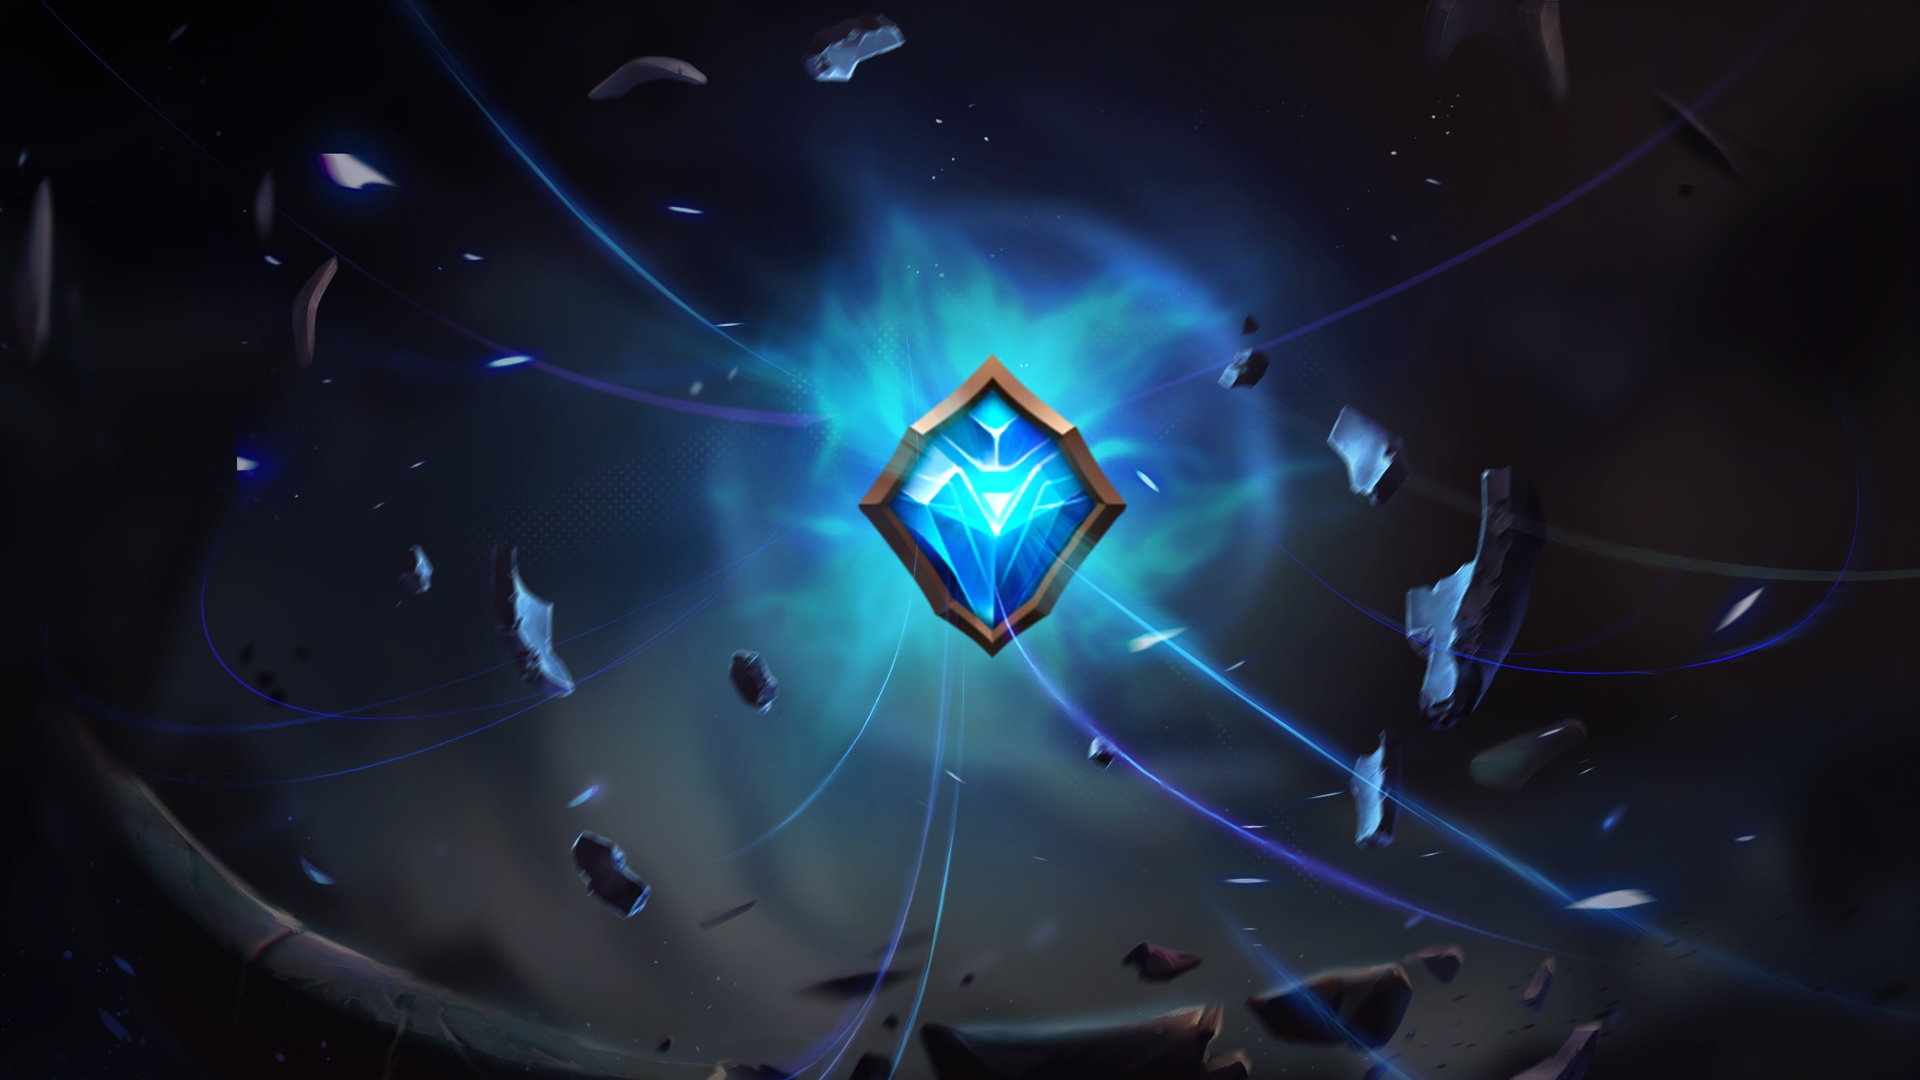 ARAM changes are live on the PBE: Here's what's new